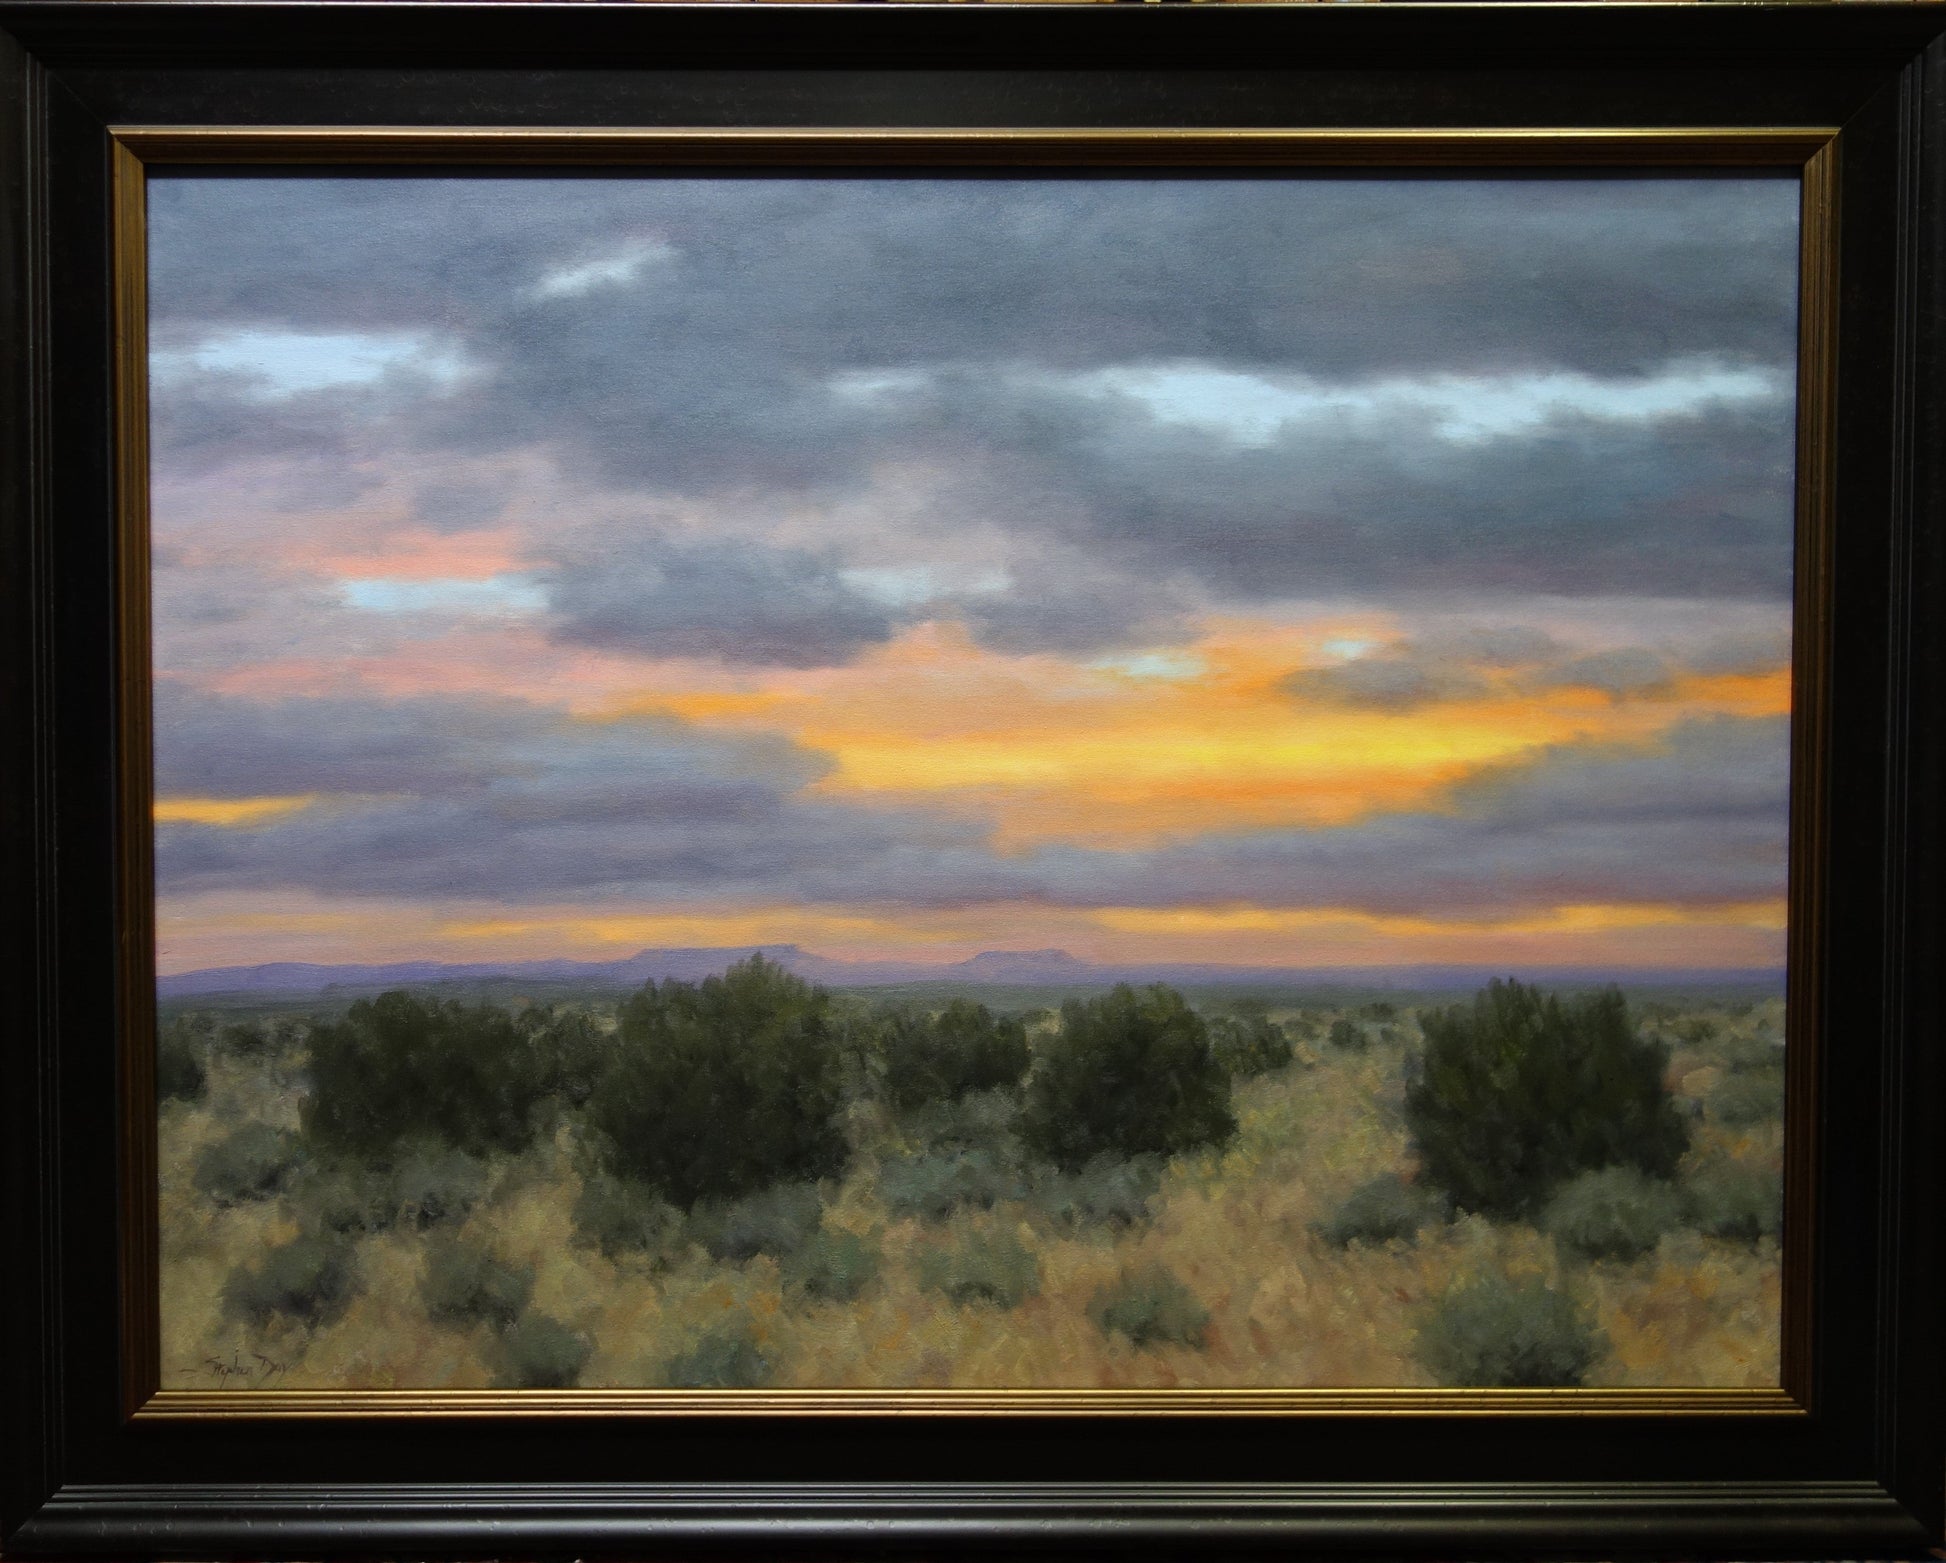 Morning Color-Painting-Stephen Day-Sorrel Sky Gallery